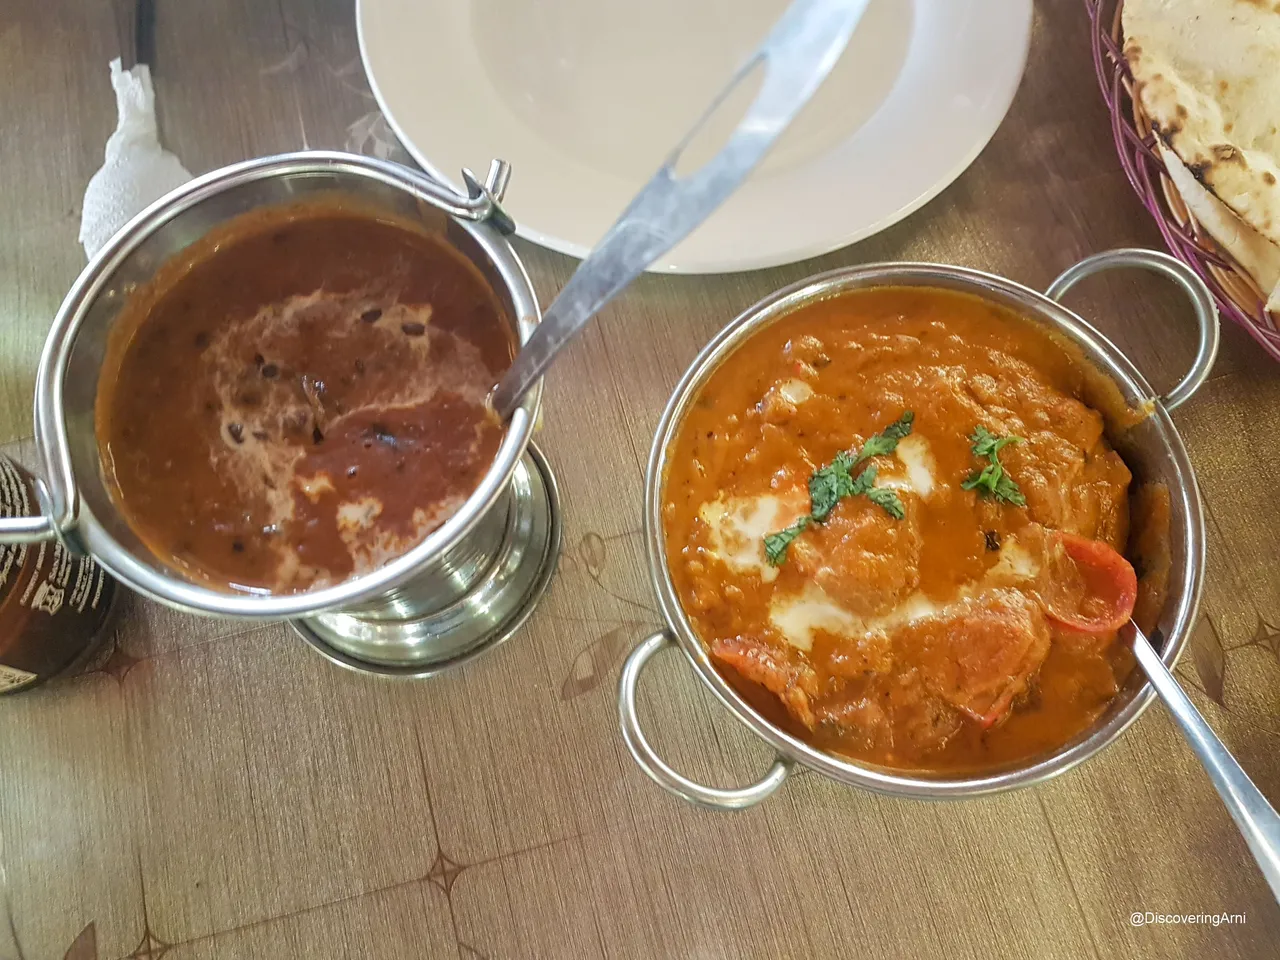 Dhal Makhani is the dish on the left